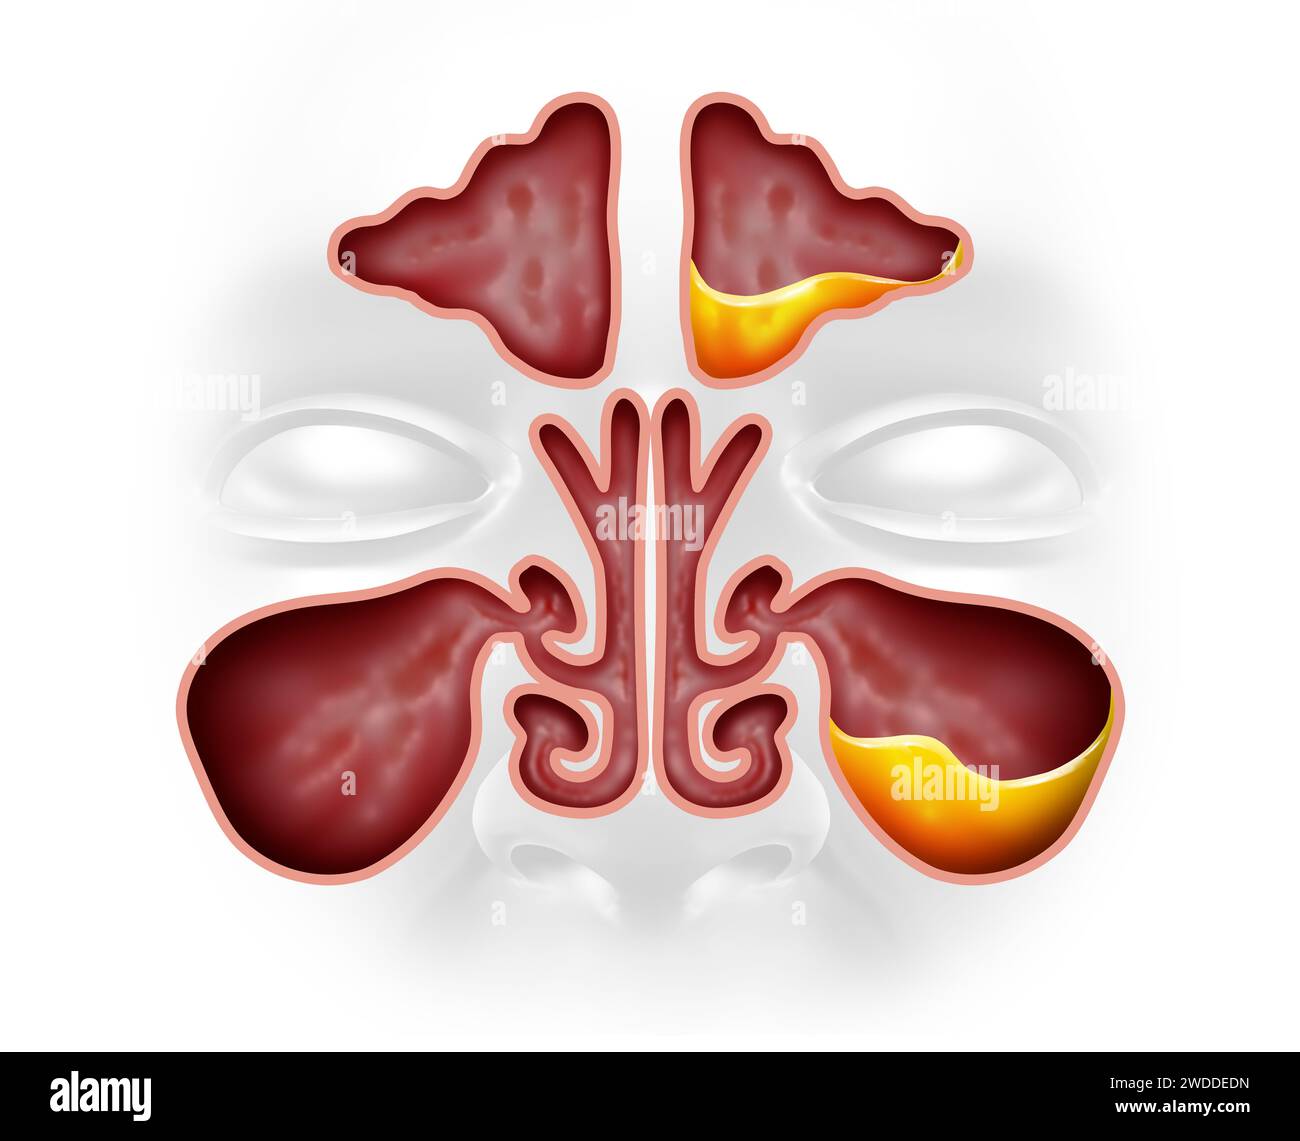 Sinusitis and healthy Sinus  as an Infection illness with nasal congestion as a cavity blockage disease with a congested nose full of mucus or pus. Stock Photo